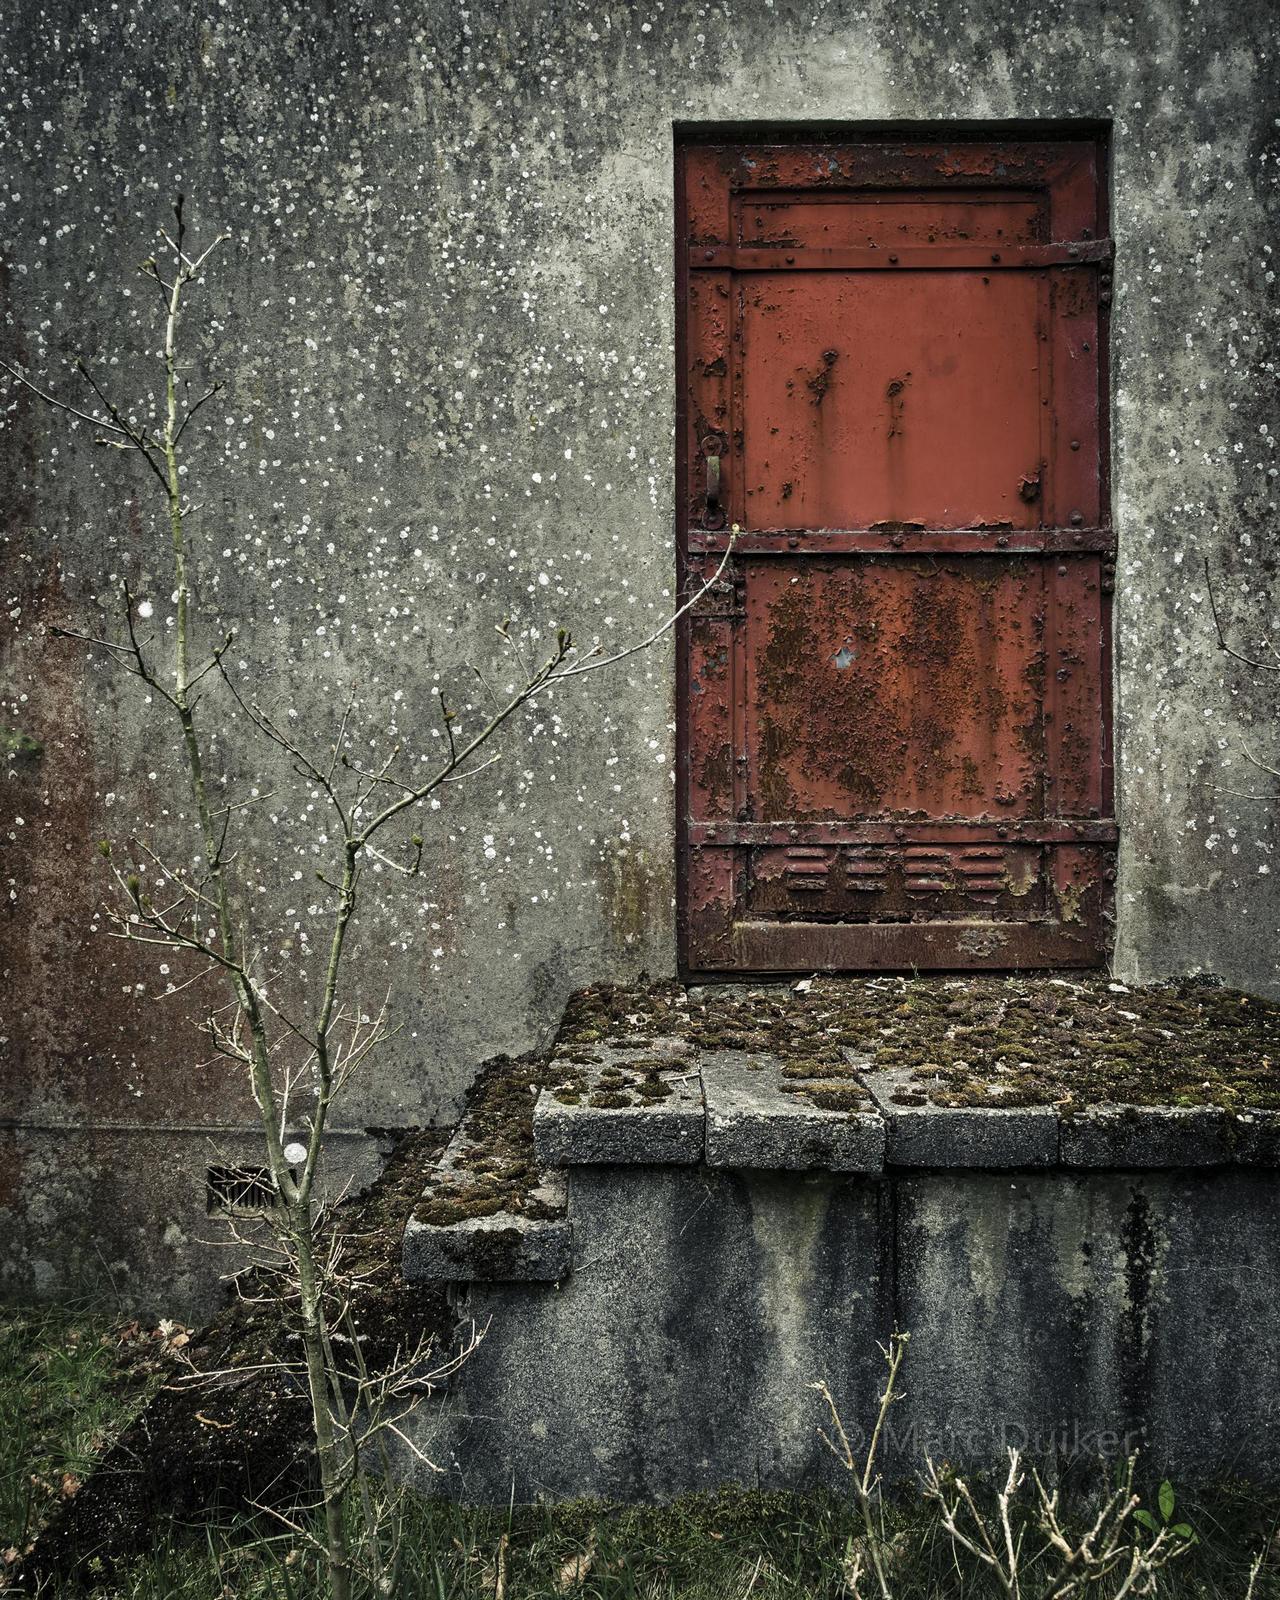 'I see a red door...' © by Marc Duiker